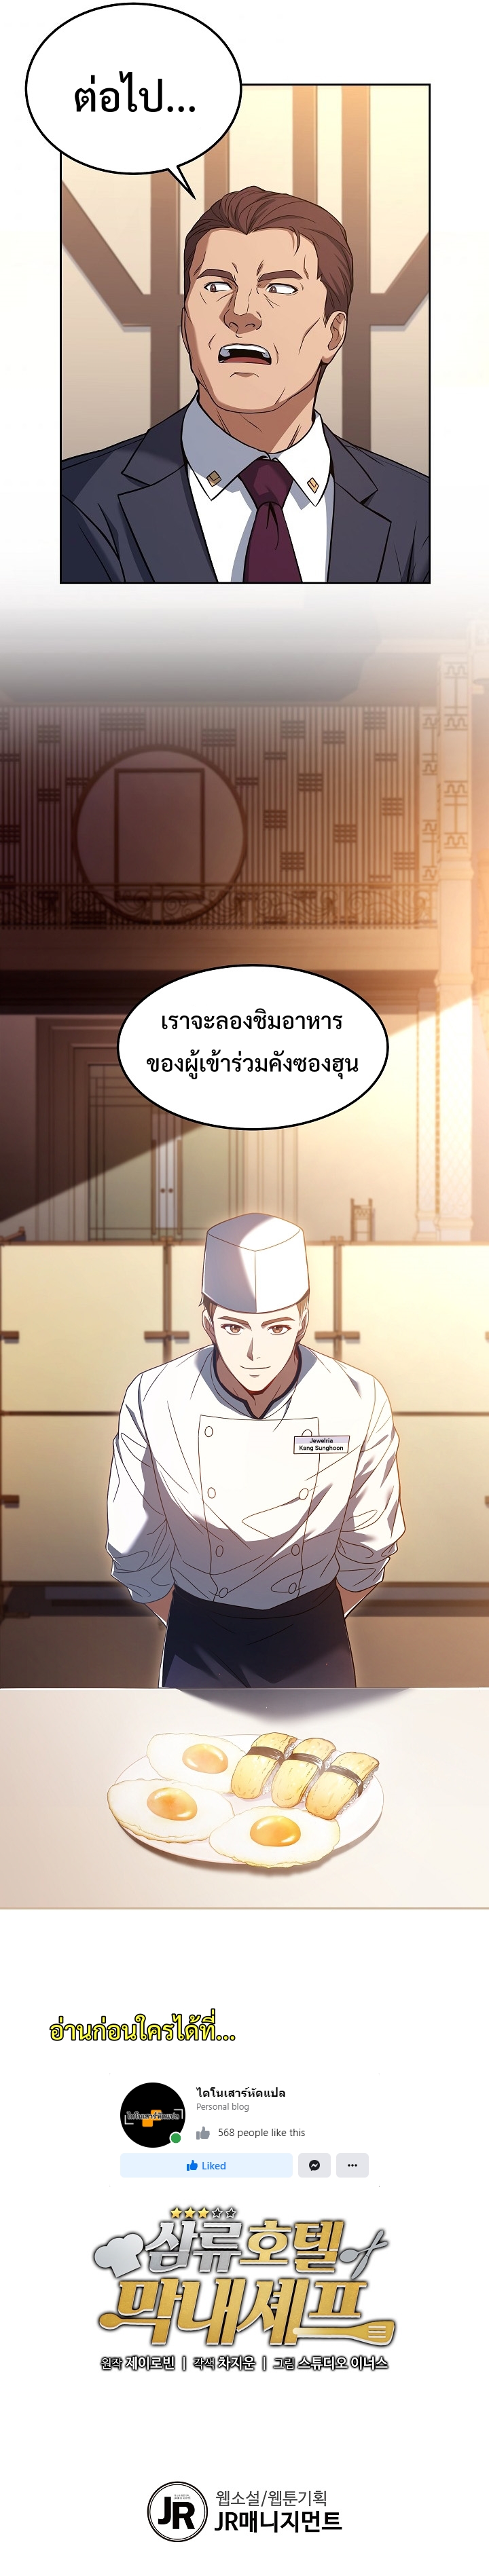 Youngest Chef from the 3rd Rate Hotel 26 (22)